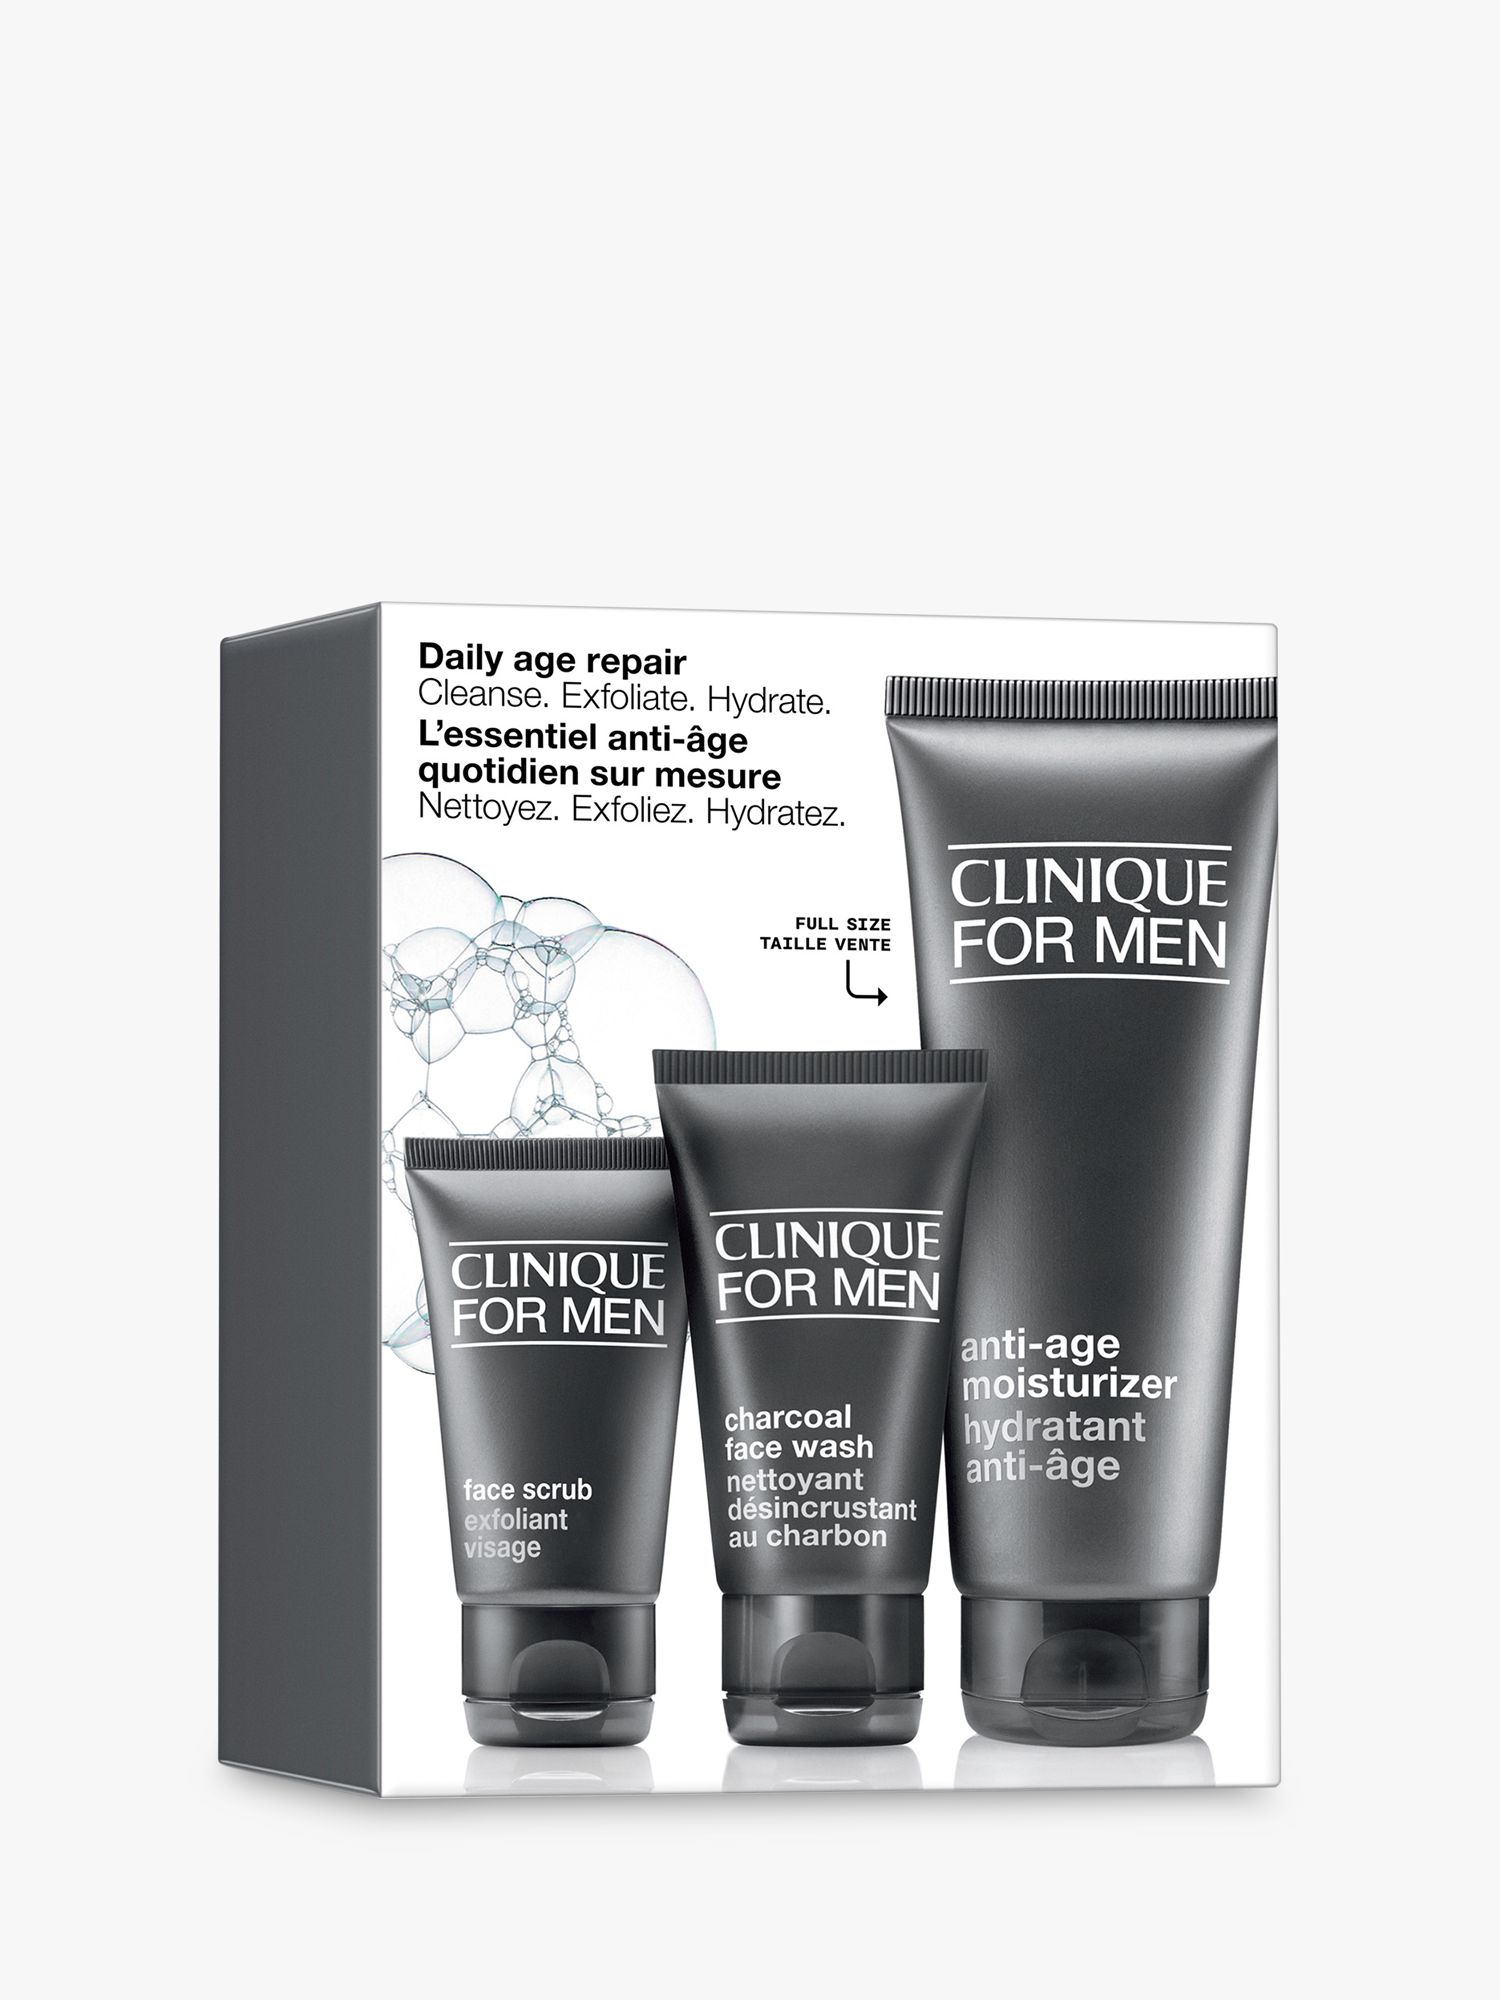 Clinique Daily Age Repair Skincare Gift Set for Men 3